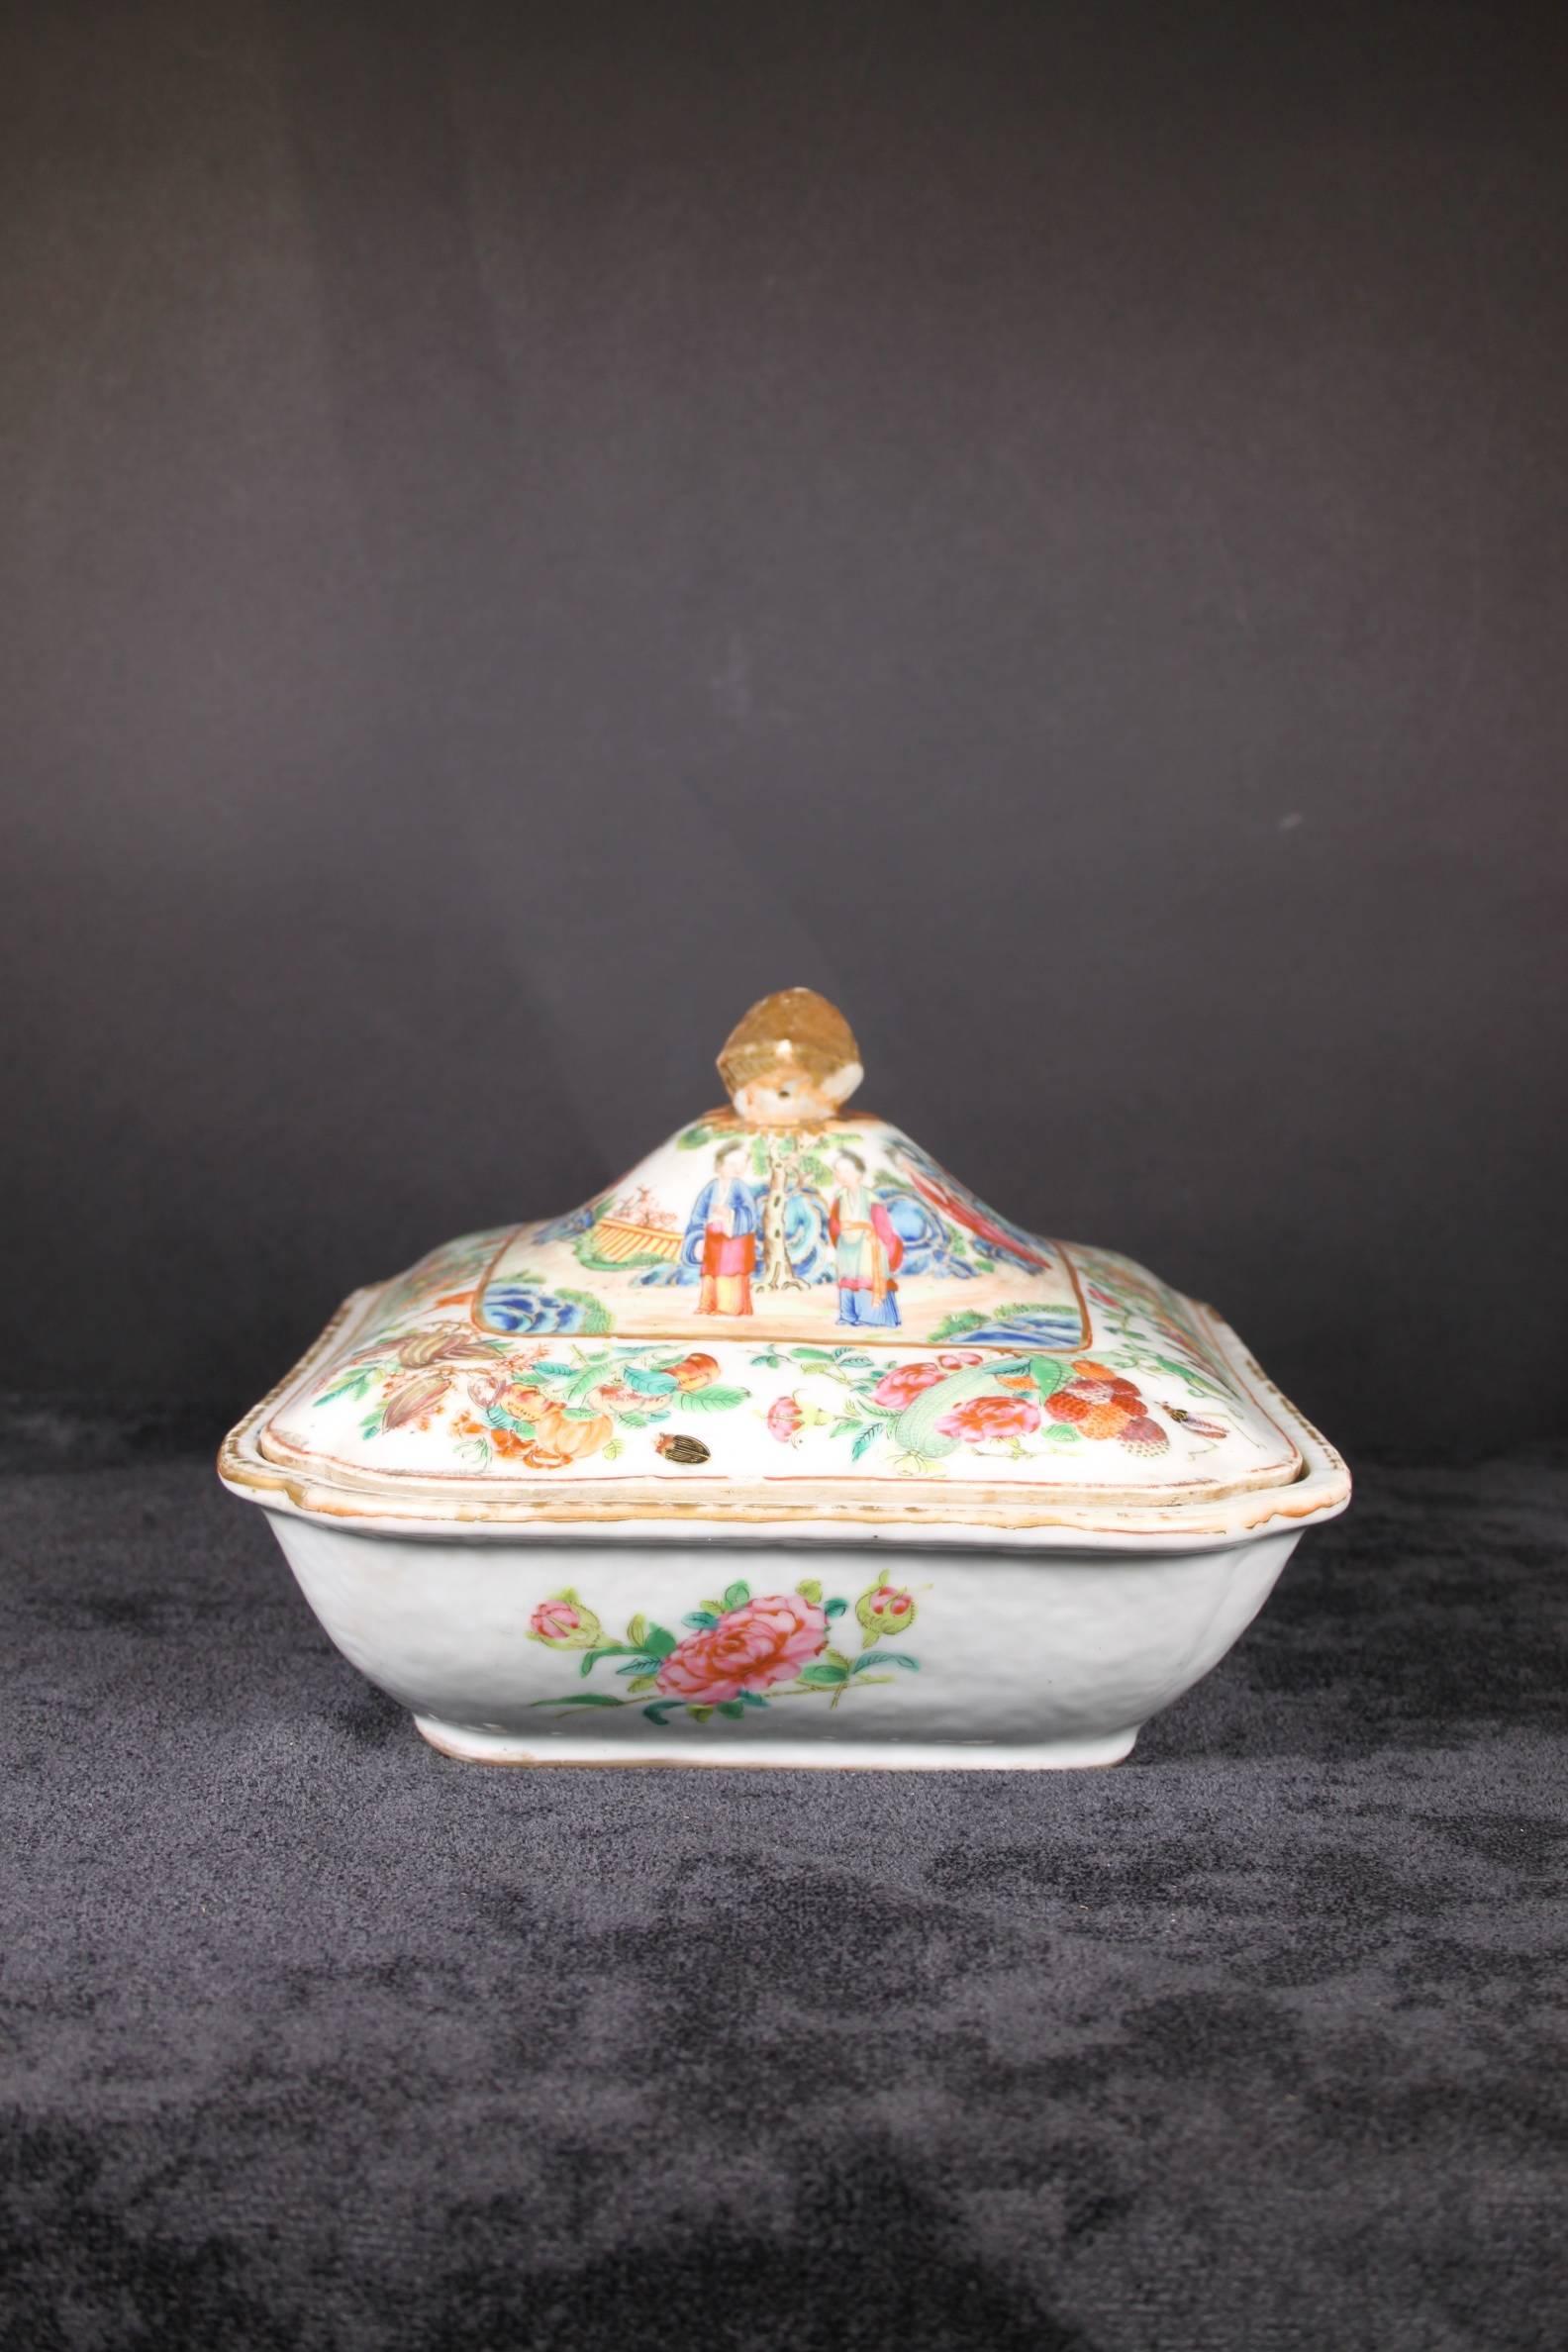 Rare and Elegant 19th Century Chinese Porcelain lidded dish in beautiful Cantonese Export Famille Rose style color palette. Very fine painting underglaze with shell topped lid. 